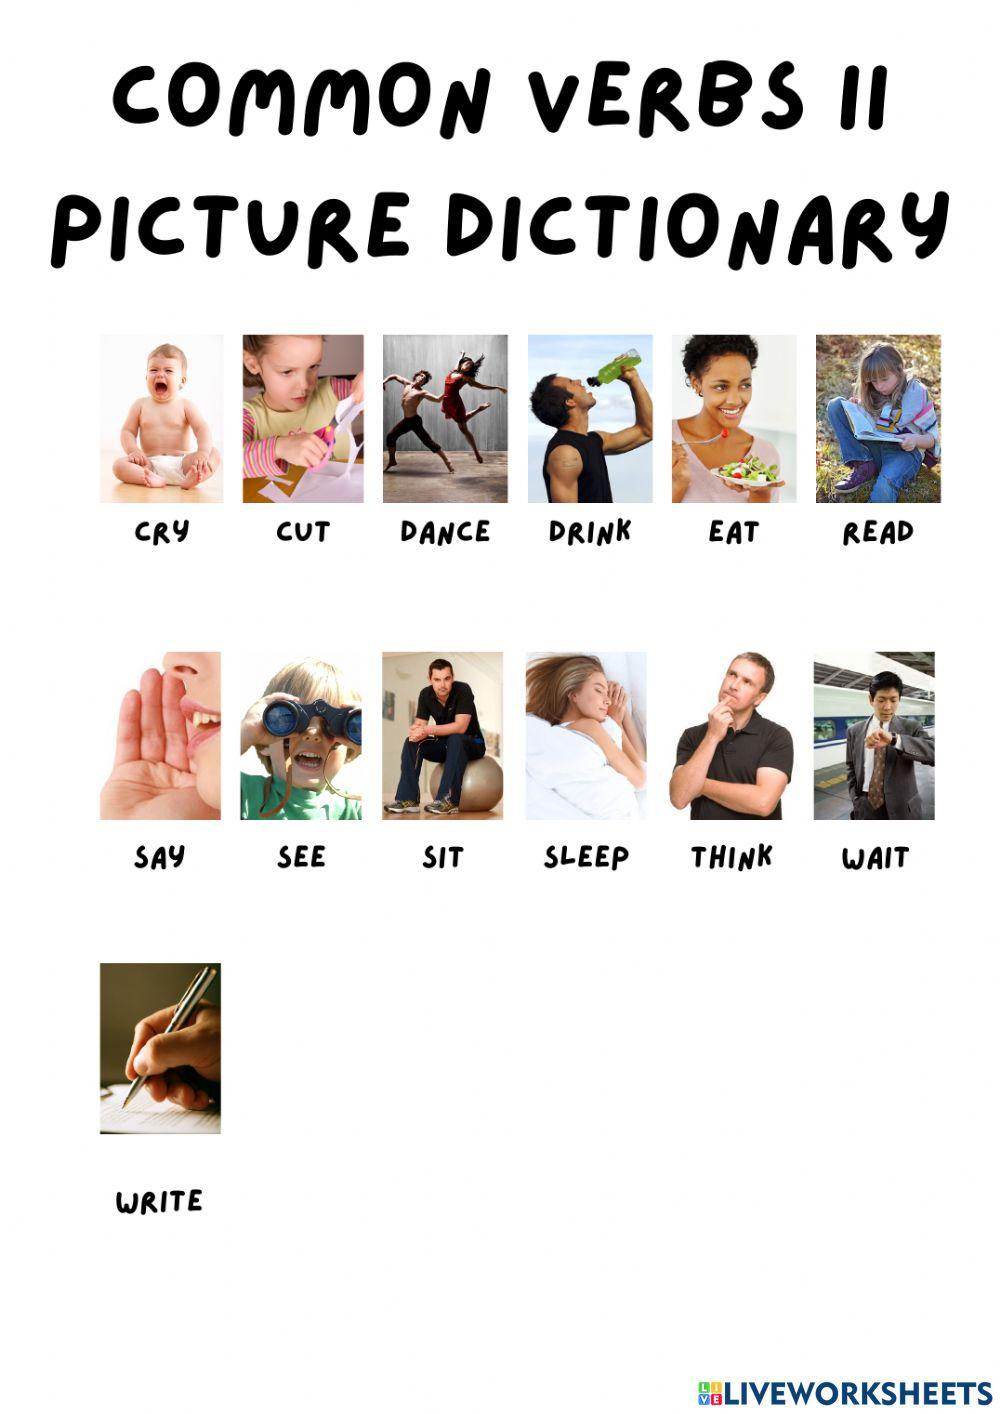 Common verbs II Picture dictionary